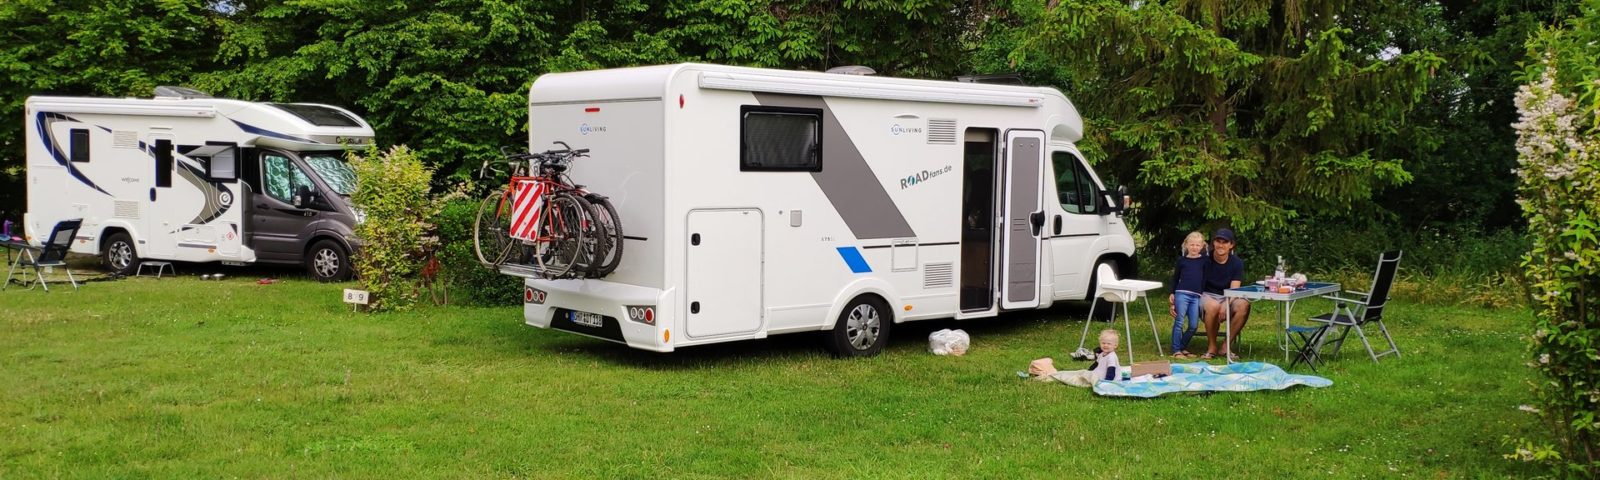 Camping pitch for caravan and motorhome - Poitiers, France